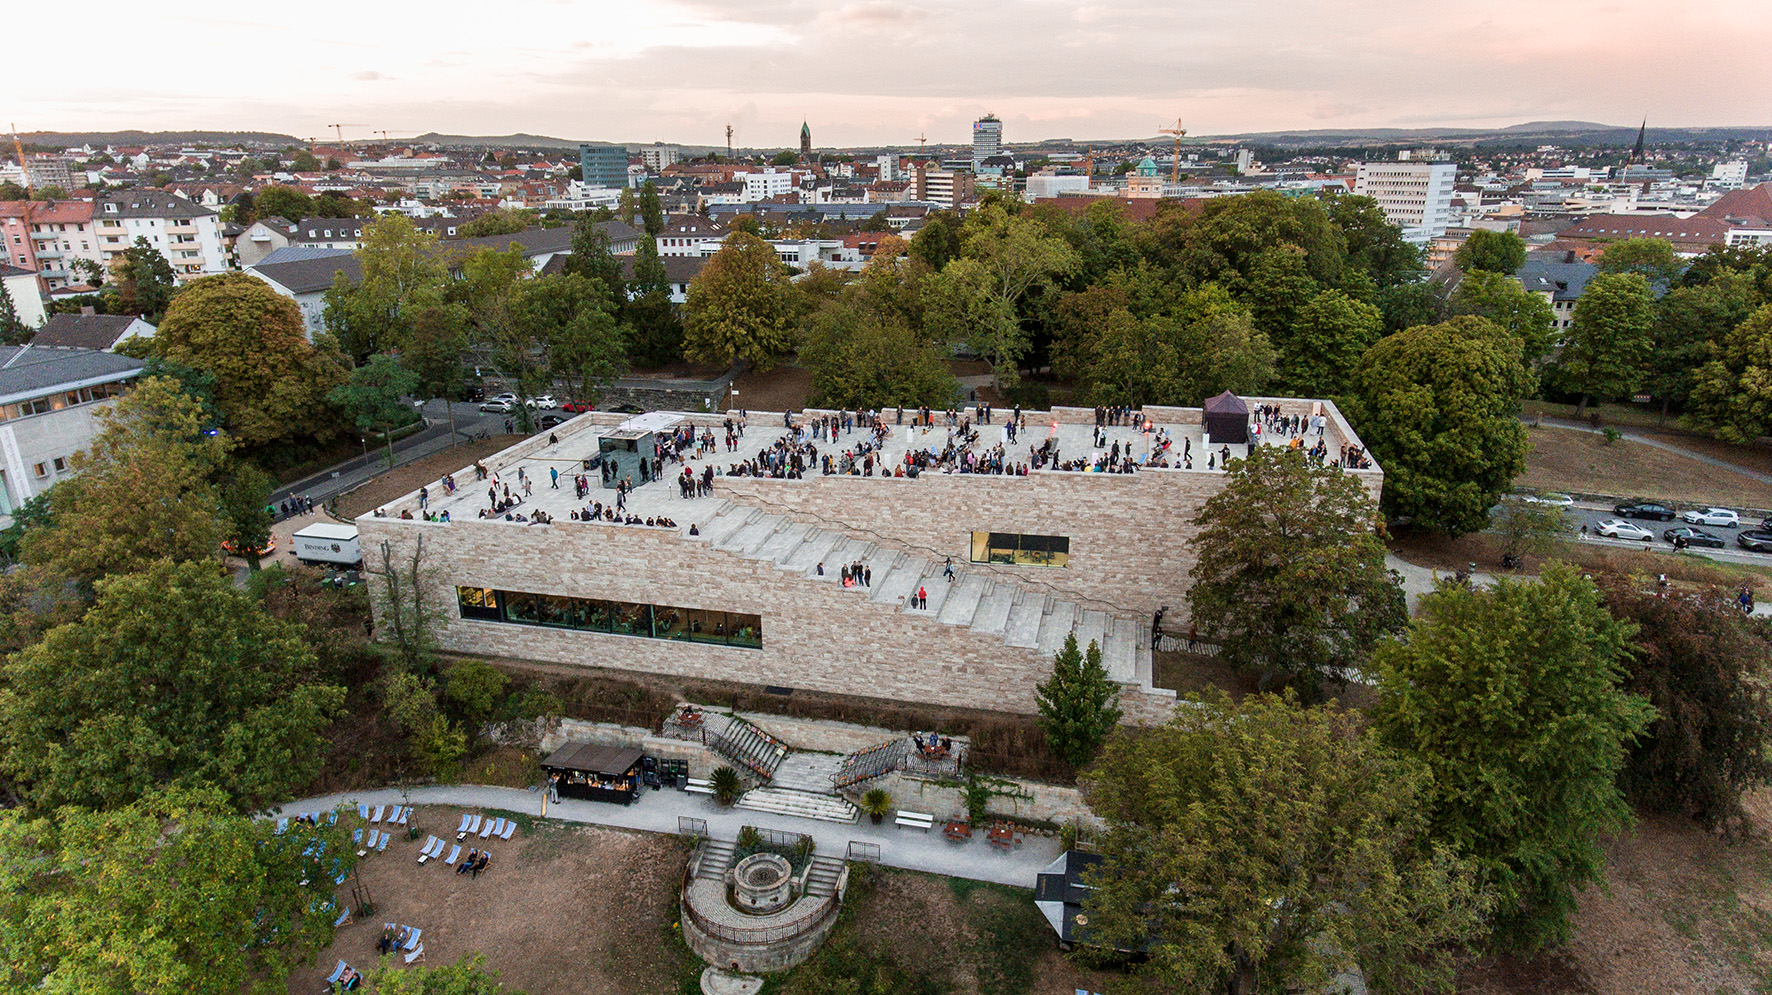 The photo shows the modern building of Grimmwelt Kassel from the bird's eye view. On the roof of the building, which is accessible by wide stairs, there are many people. Around the building many trees and on the horizon the skyline of Kassel.